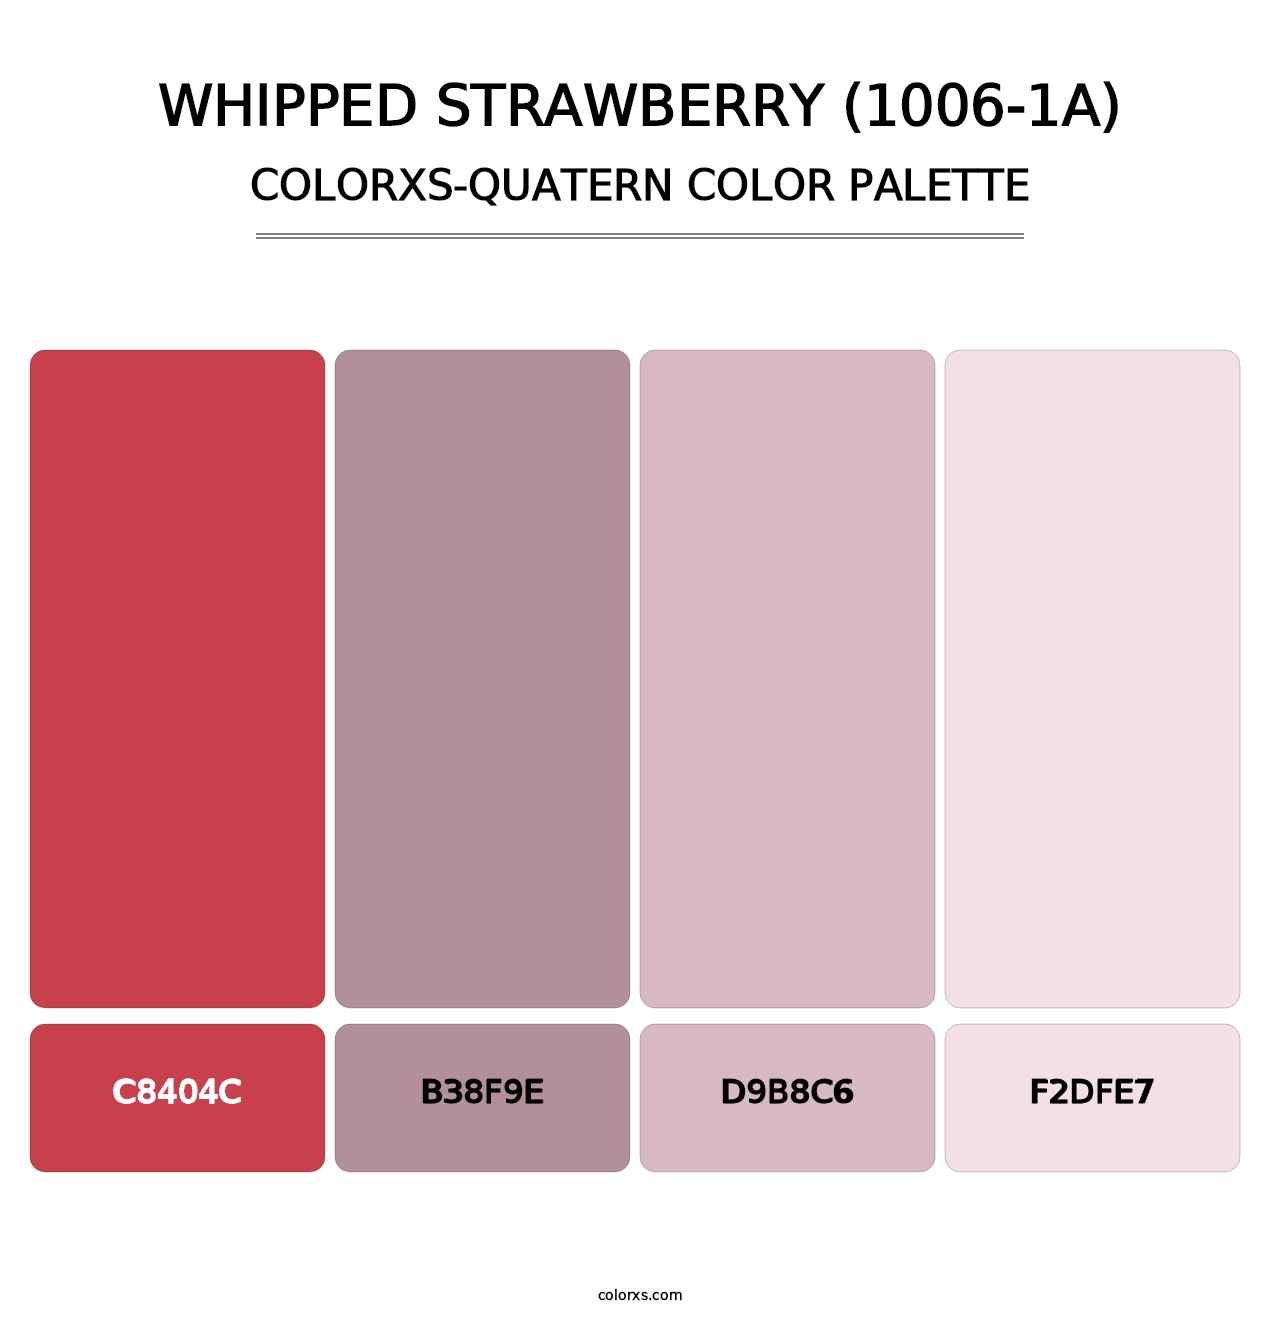 Whipped Strawberry (1006-1A) - Colorxs Quatern Palette